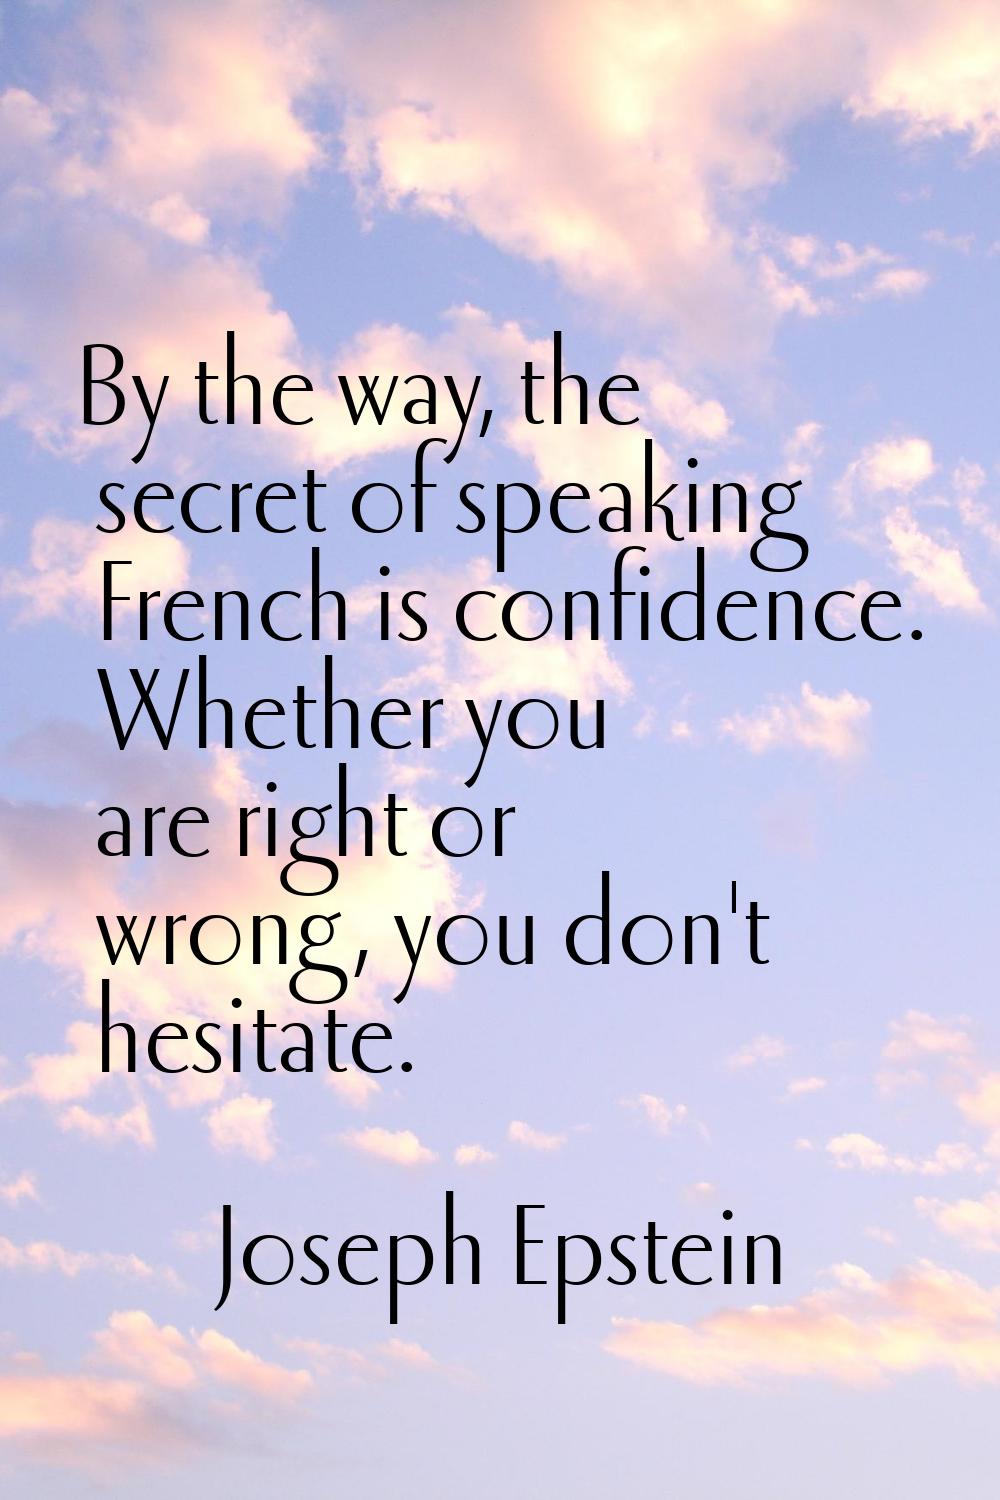 By the way, the secret of speaking French is confidence. Whether you are right or wrong, you don't 